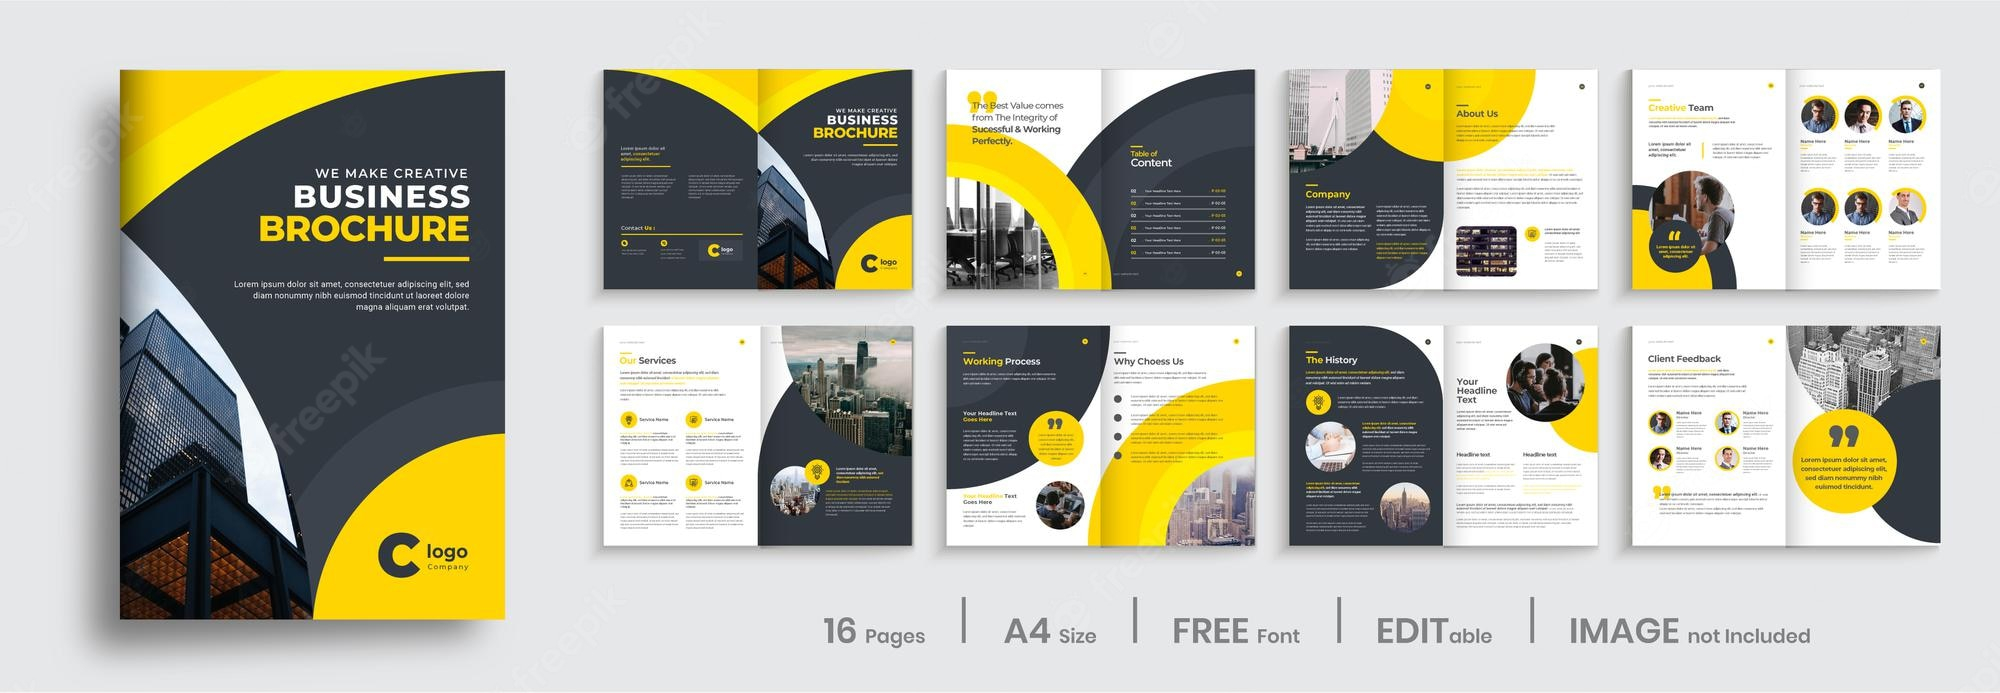 Brochure template Vectors & Illustrations for Free Download  Freepik Pertaining To Ai Brochure Templates Free Download